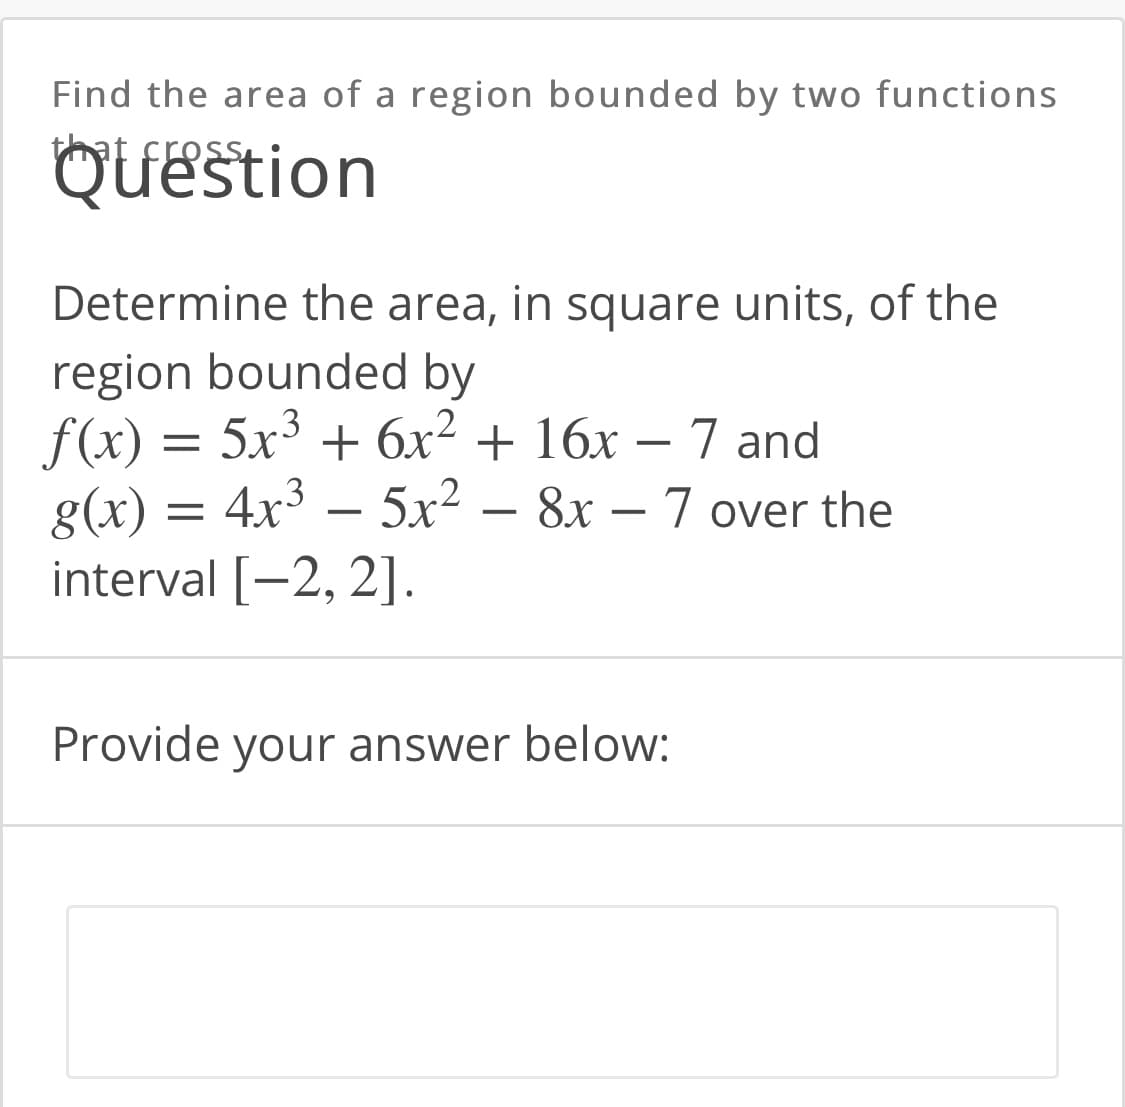 Find the area of a region bounded by two functions
that cress
Question
Determine the area, in square units, of the
region bounded by
f(x) = 5x3 + 6x² + 16x – 7 and
g(x) = 4x³ – 5x2
interval [-2, 2].
8x – 7 over the
Provide your answer below:
